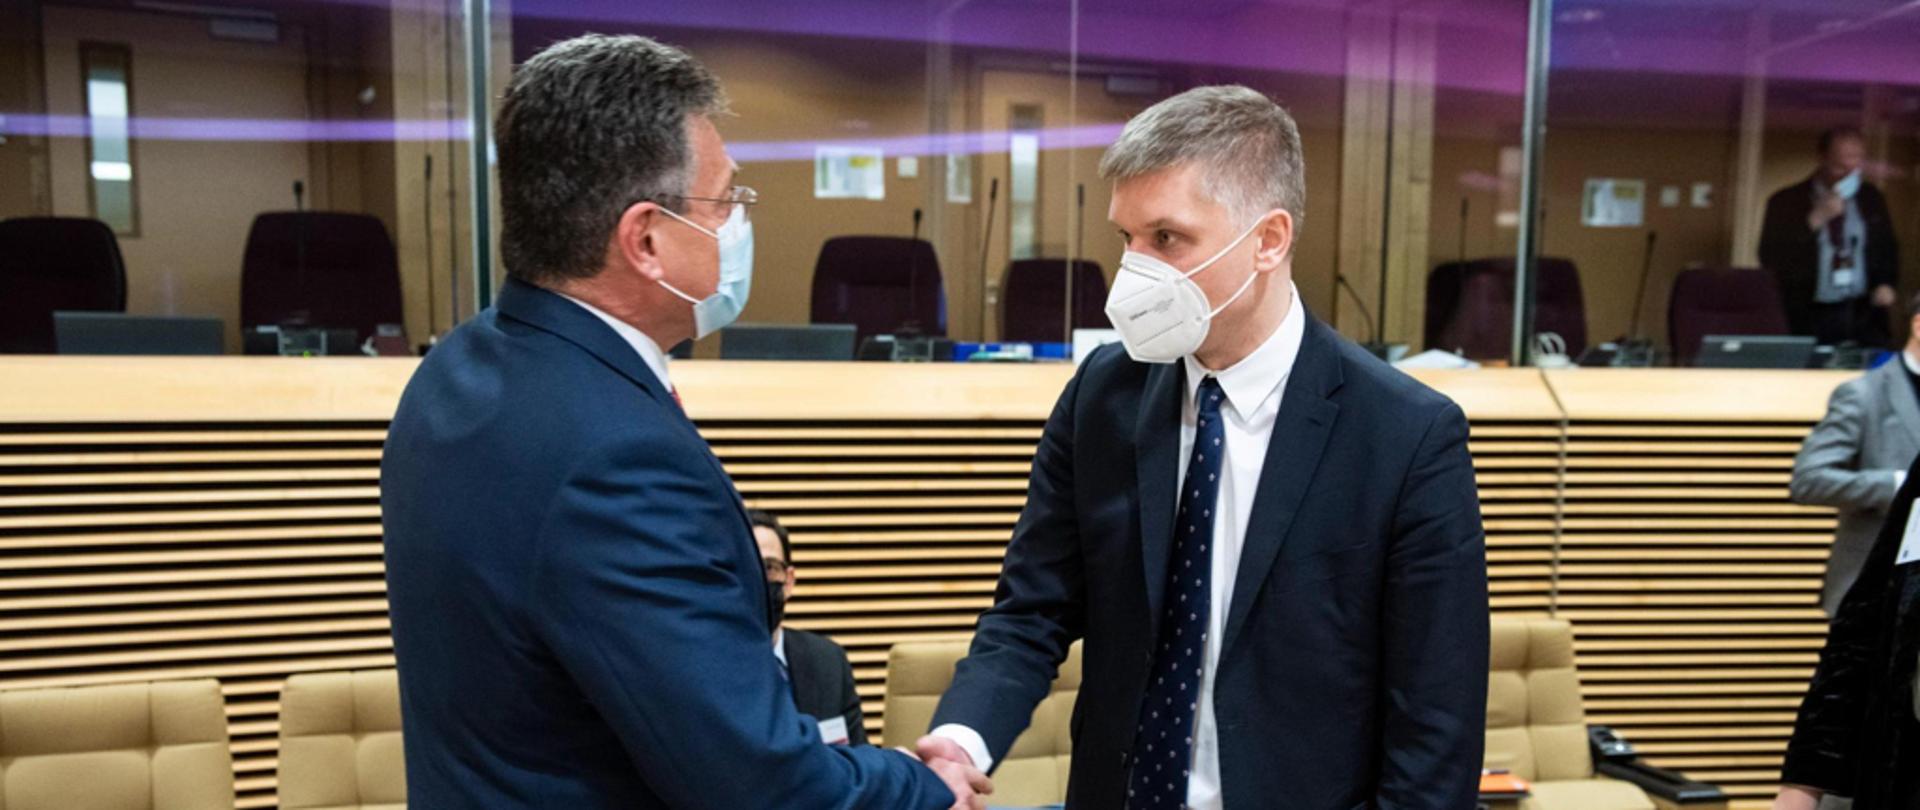 Minister of Economic Development and Technology Piotr Nowak during the Brussels meeting of the European Battery Alliance (EBA) shaking hands with European Commission Vice-President Maroš Šefčovič